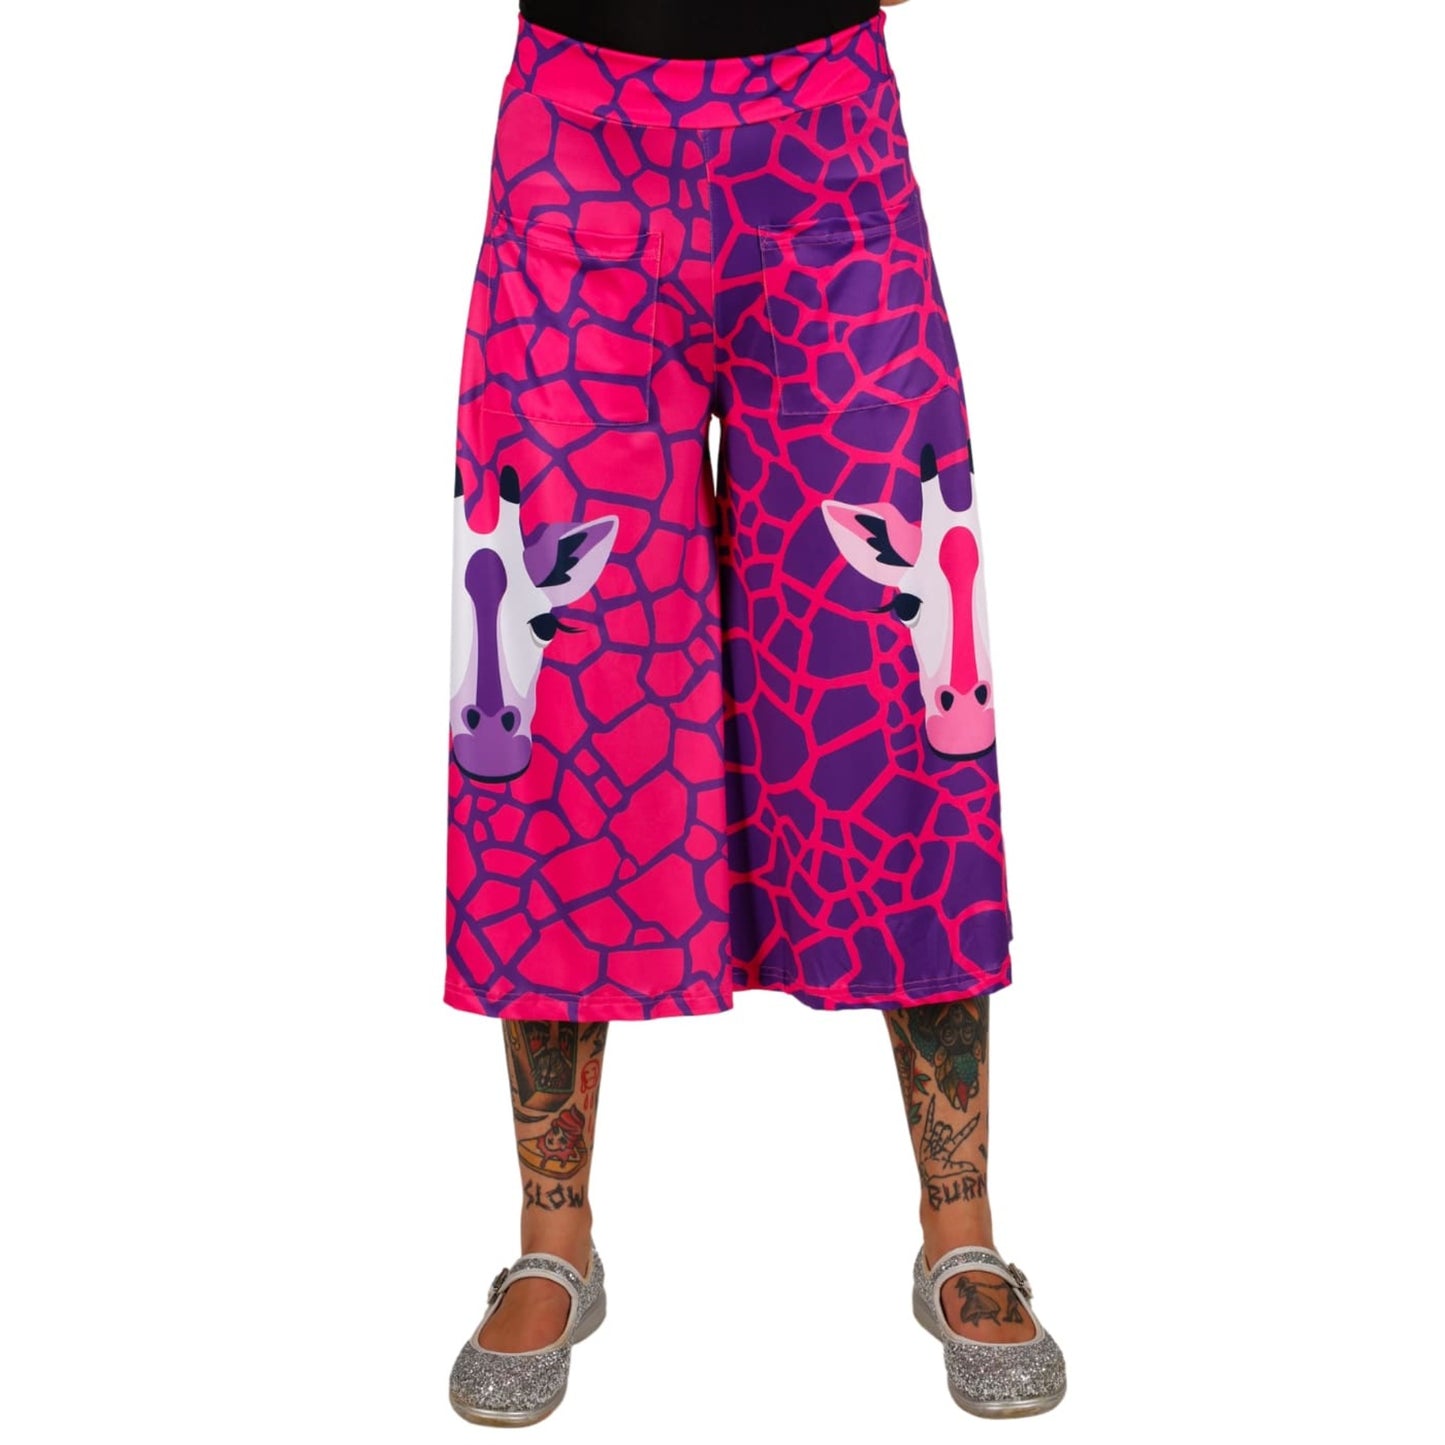 Andy Culottes by RainbowsAndFairies.com (Giraffe - Pink & Purple - Jungle - 3 Quarter Pants - Rockabilly - Vintage Inspired) - SKU: CL_CULTS_ANDYG_PNK - Pic 01